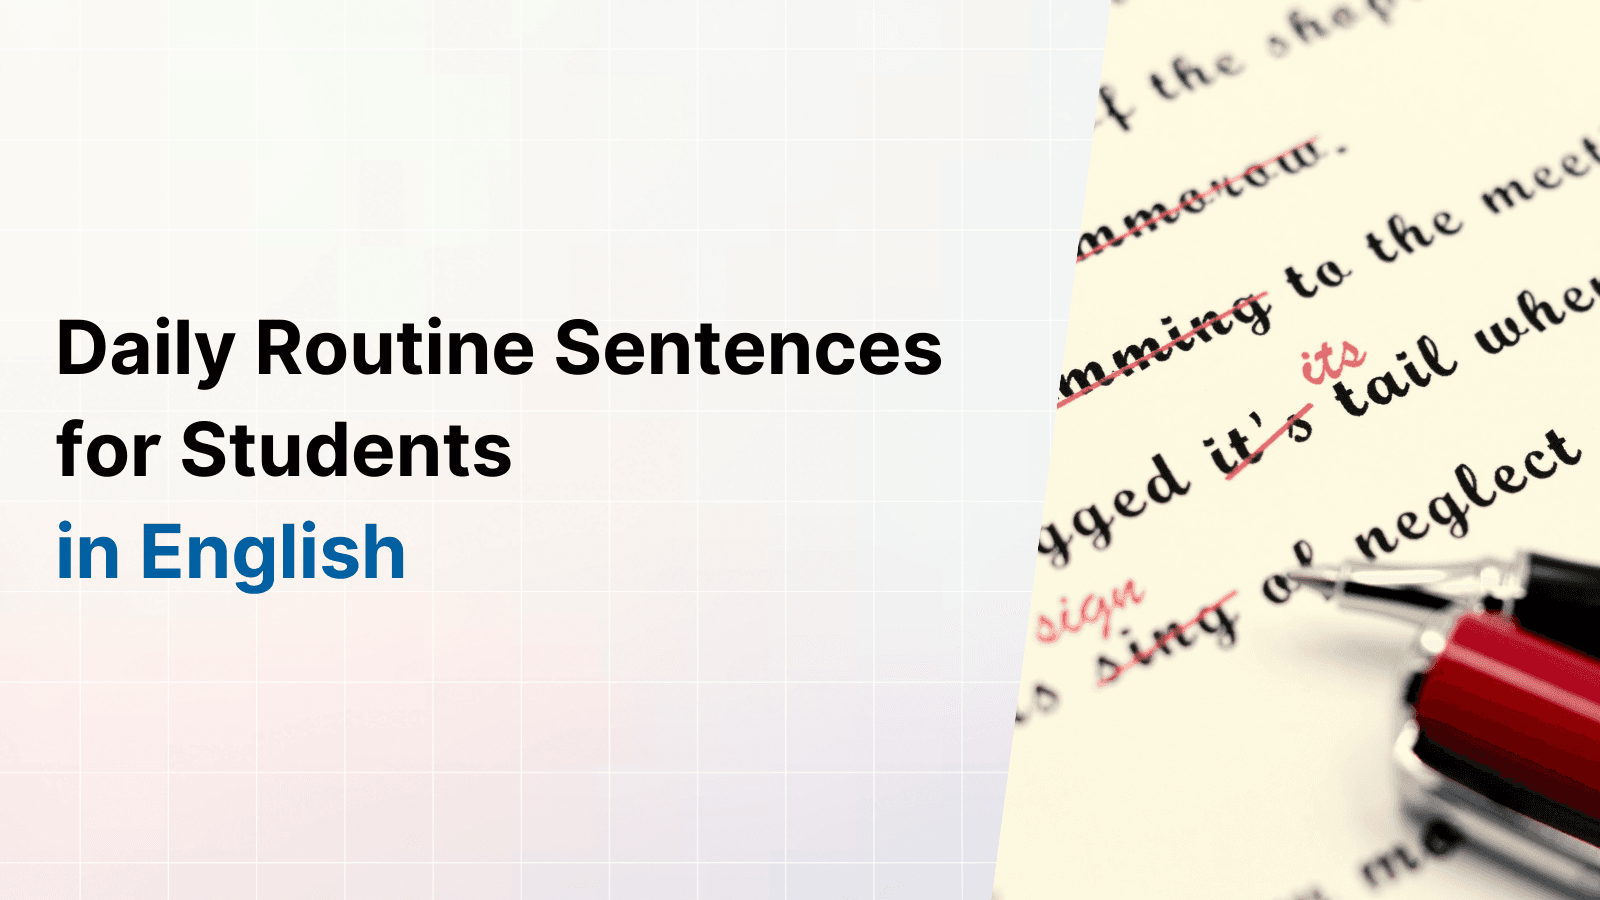 Daily Routine Sentences in English